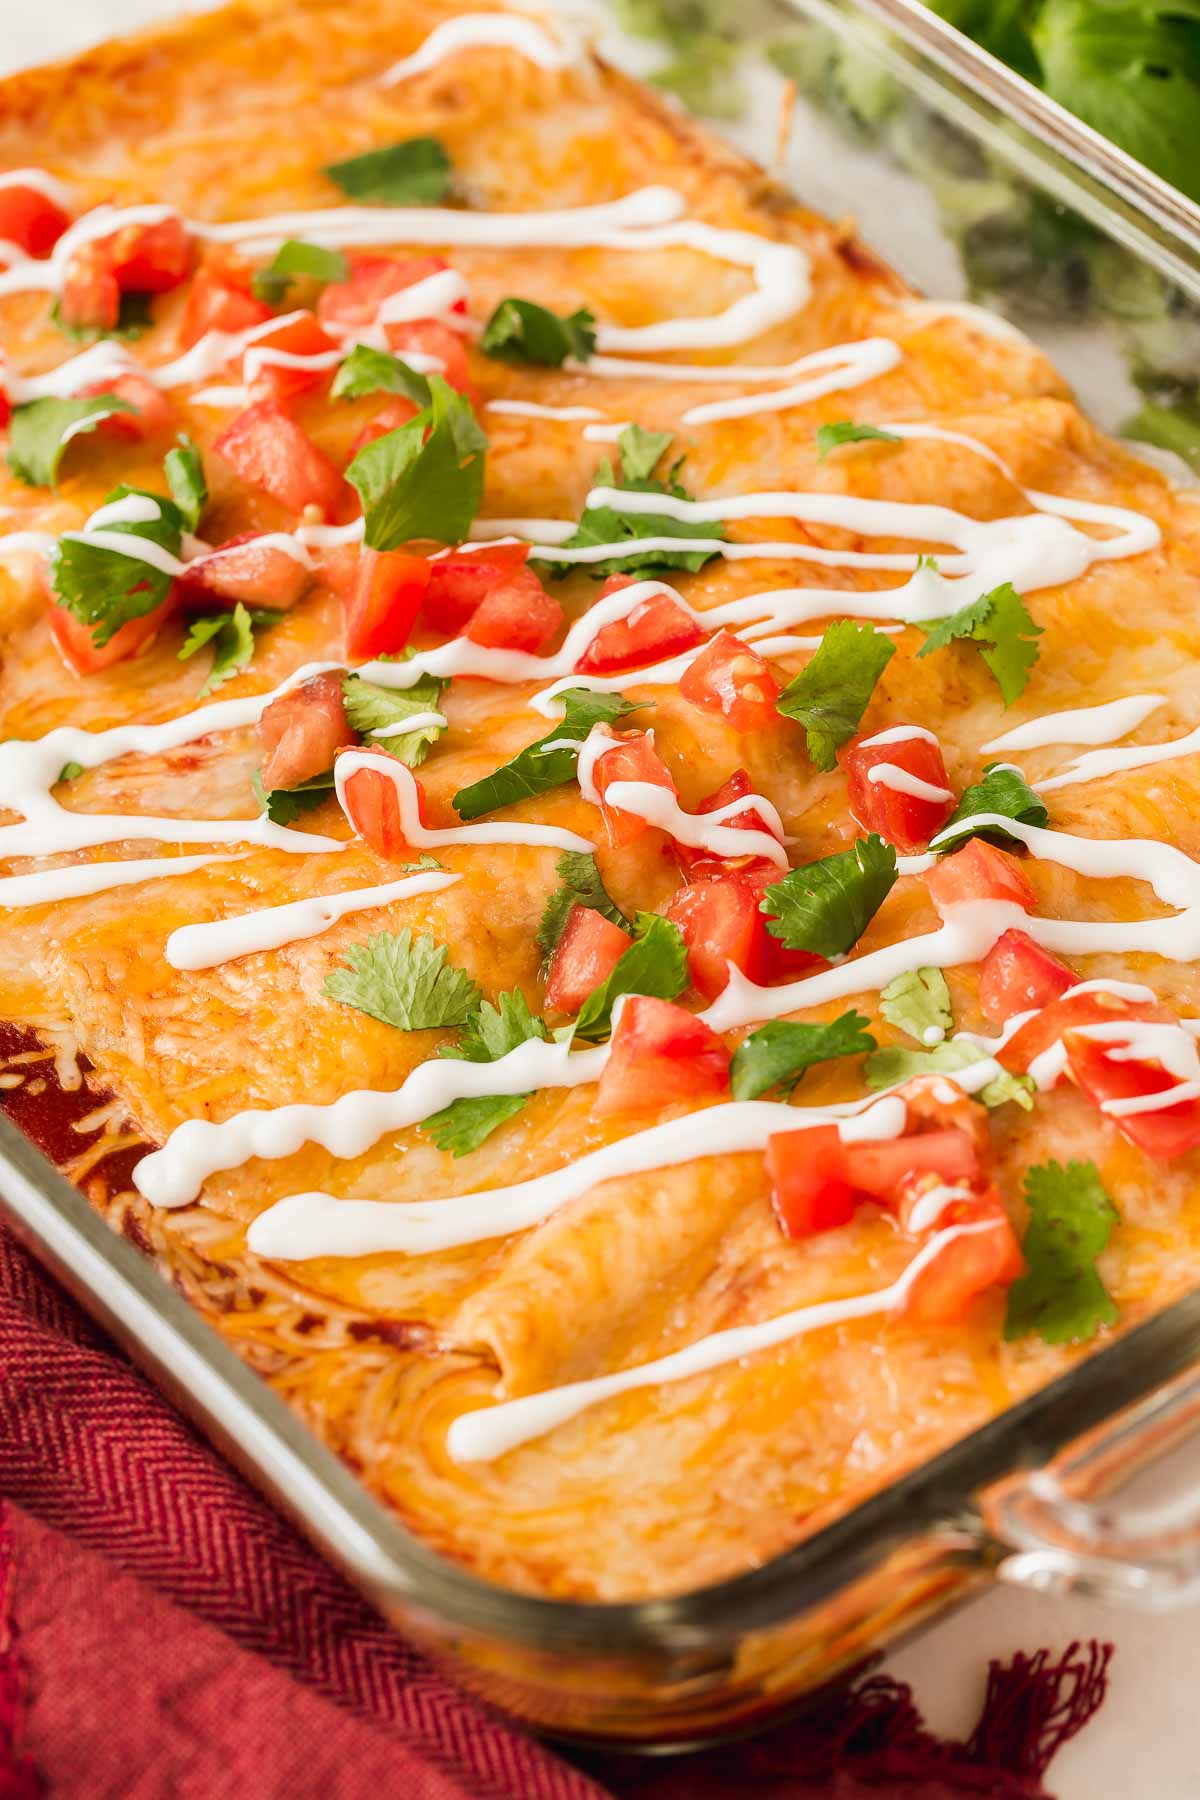 Pan of lentil enchiladas topped with pico and sour cream.